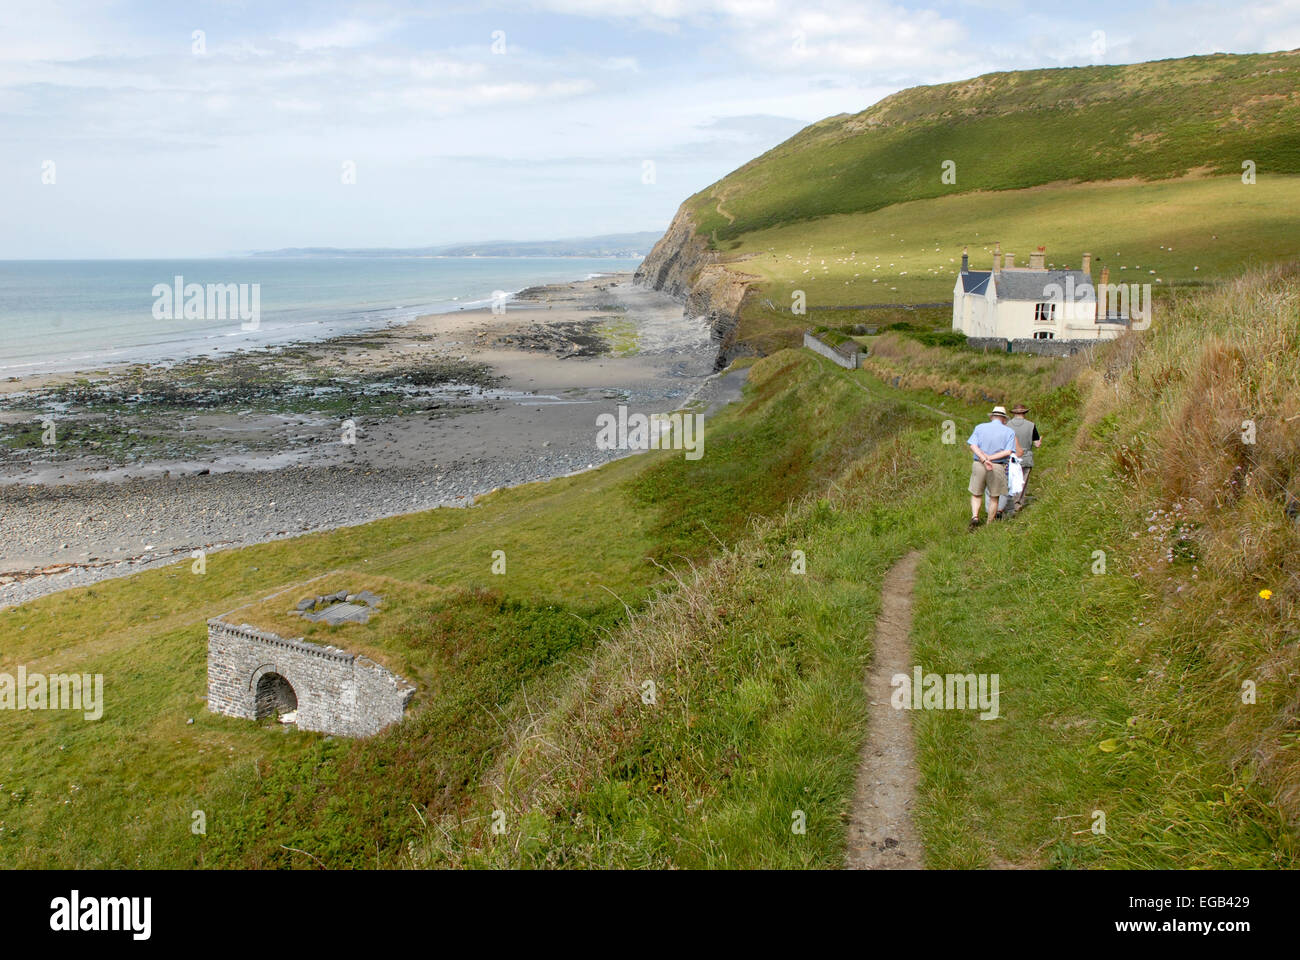 The Ceredigion Coastal Path at Wallog between Clarach and Borth on Cardigan Bay overlooking the beach and disused lime kiln. Stock Photo